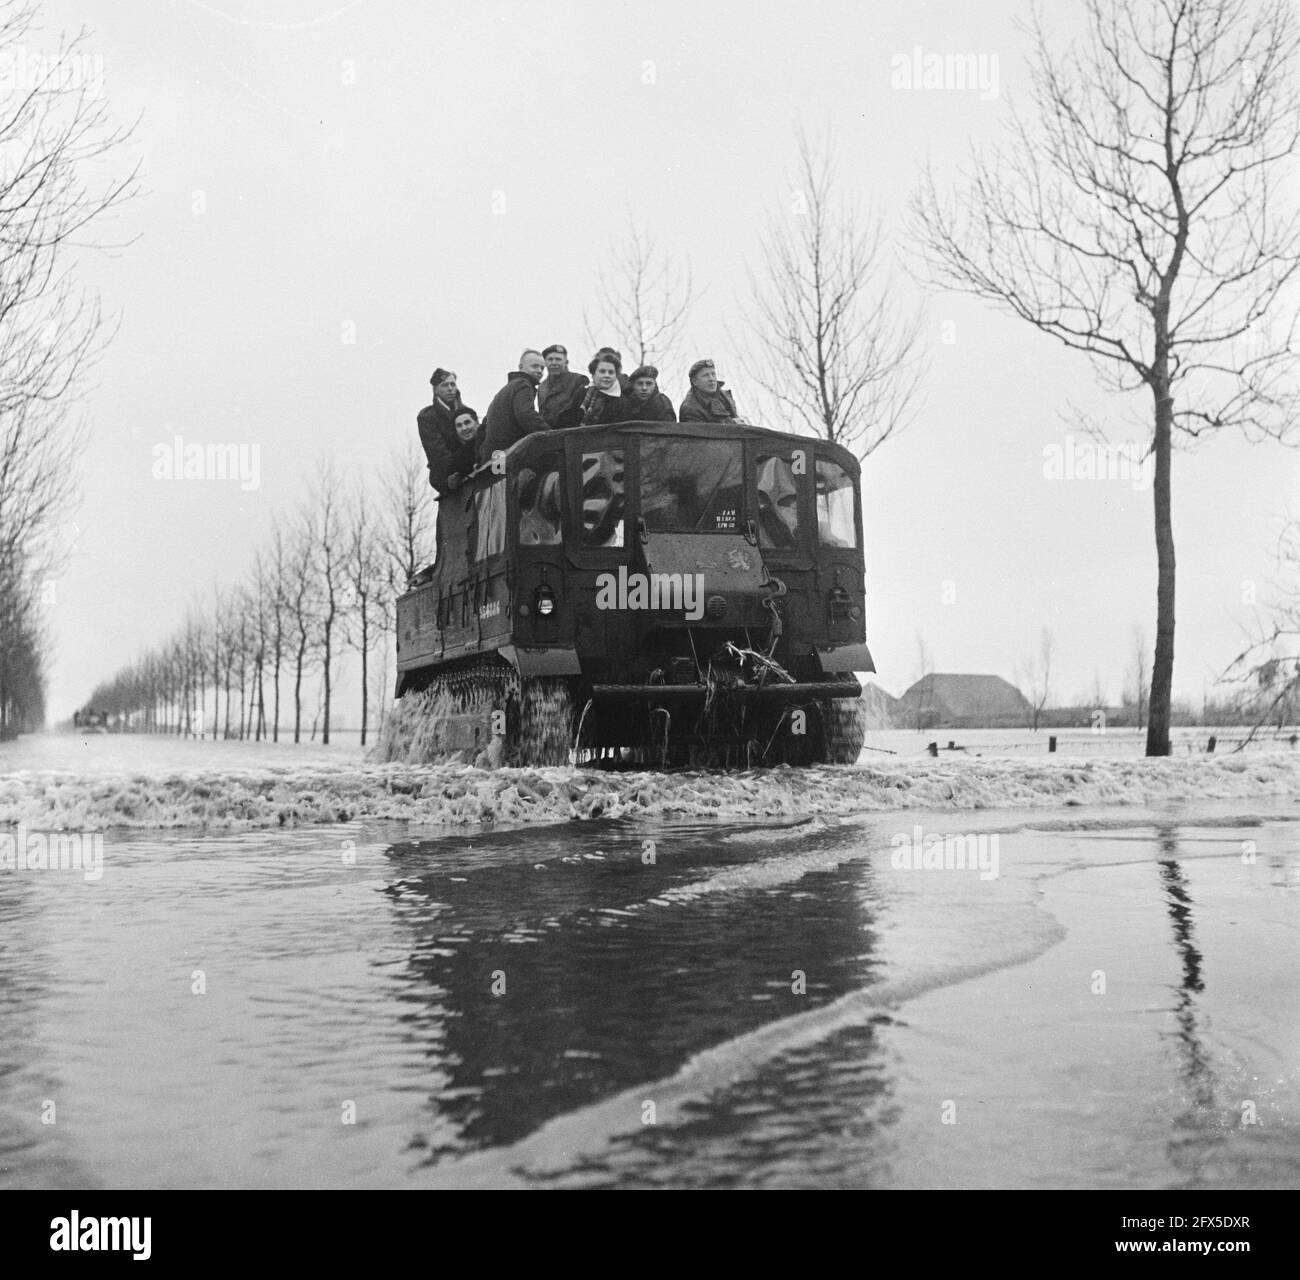 French pontooners making their way in amphibious vehicles to the isolated areas of Tholen to pick up evacuees, here near Halsteren, February 3, 1953, evacuations, relief, military, floods, vehicles, flood, The Netherlands, 20th century press agency photo, news to remember, documentary, historic photography 1945-1990, visual stories, human history of the Twentieth Century, capturing moments in time Stock Photo